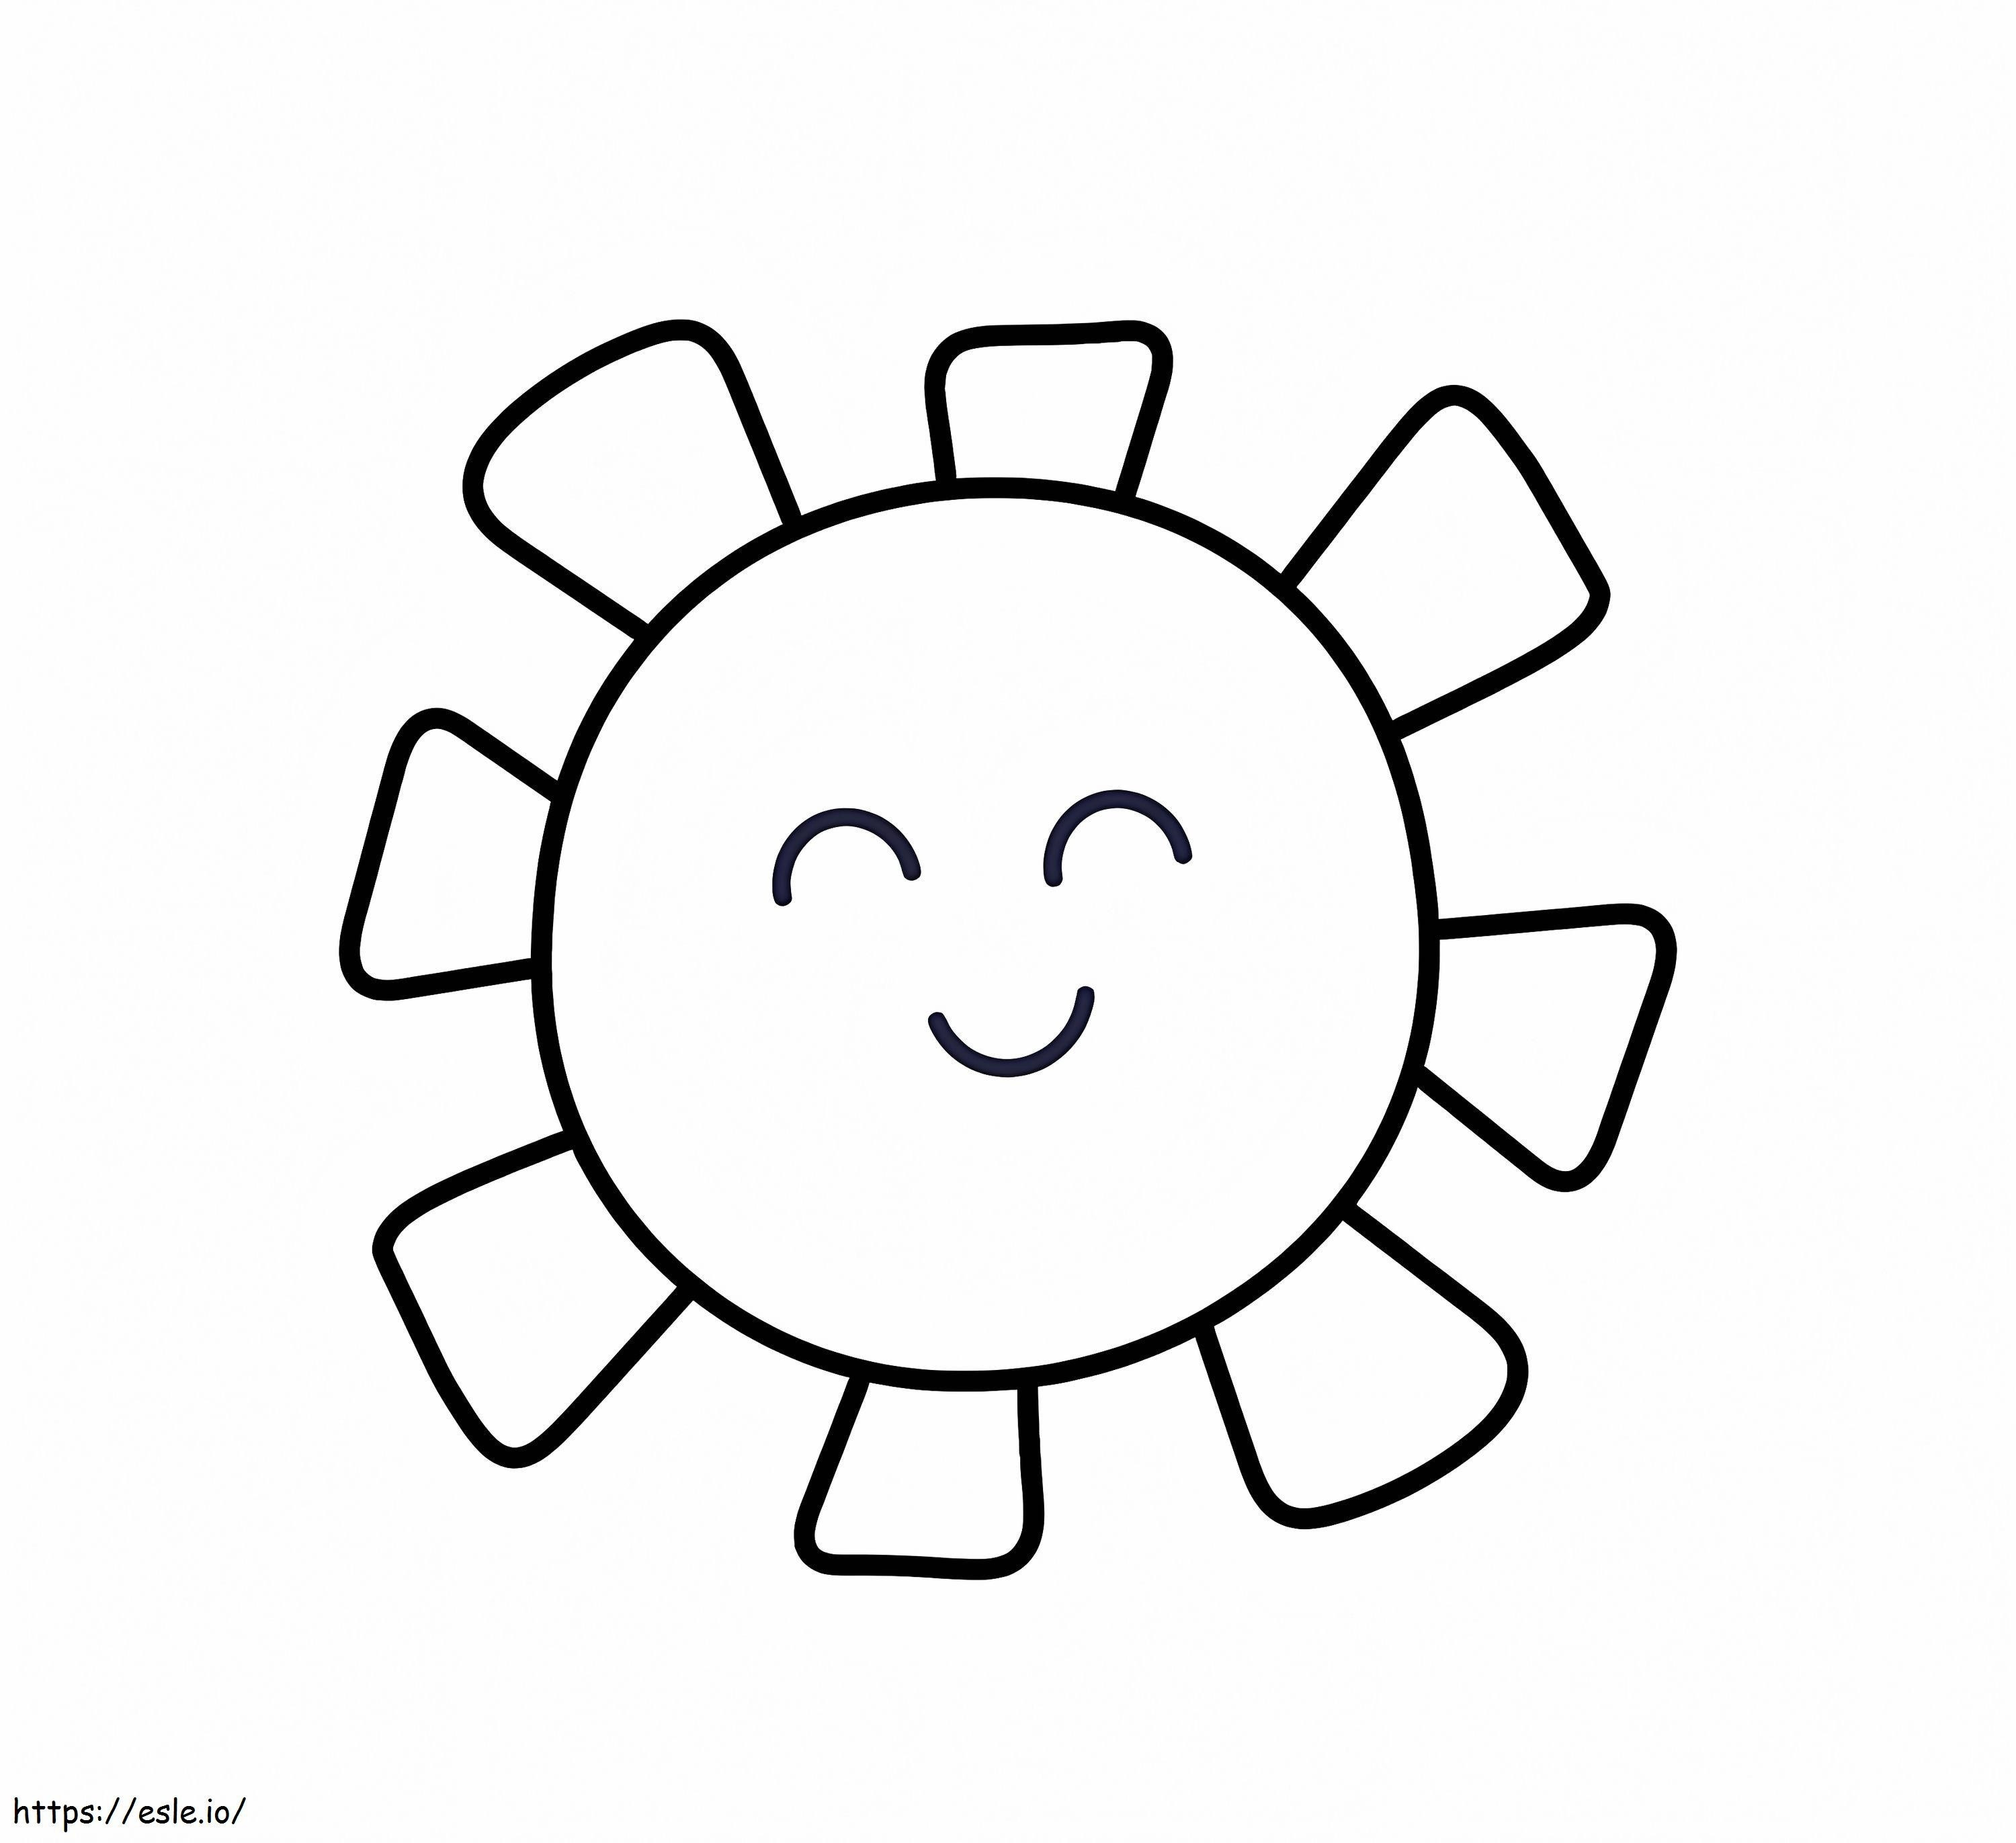 Simple Sunshine Smile coloring page